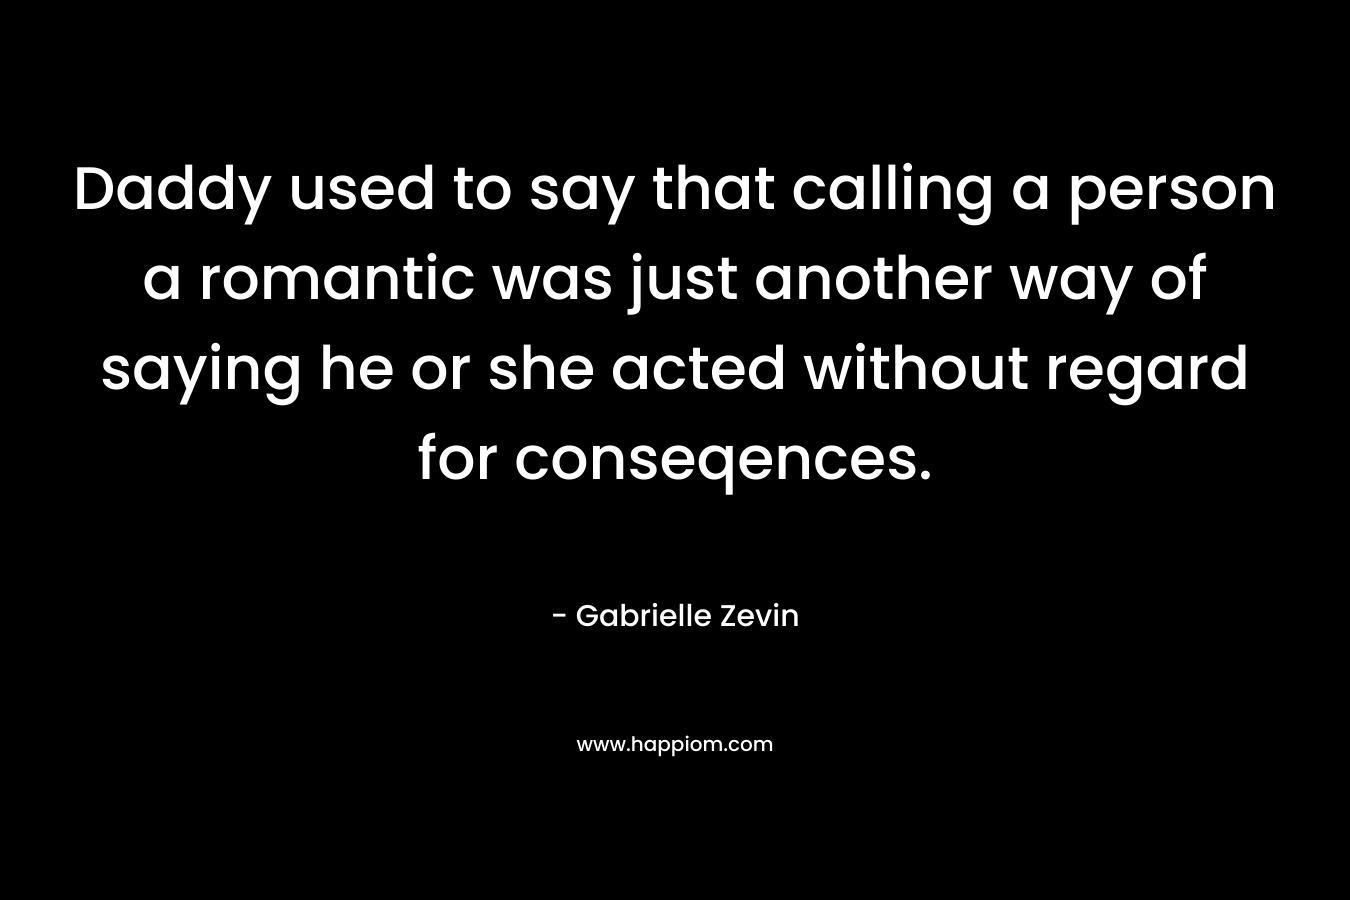 Daddy used to say that calling a person a romantic was just another way of saying he or she acted without regard for conseqences.